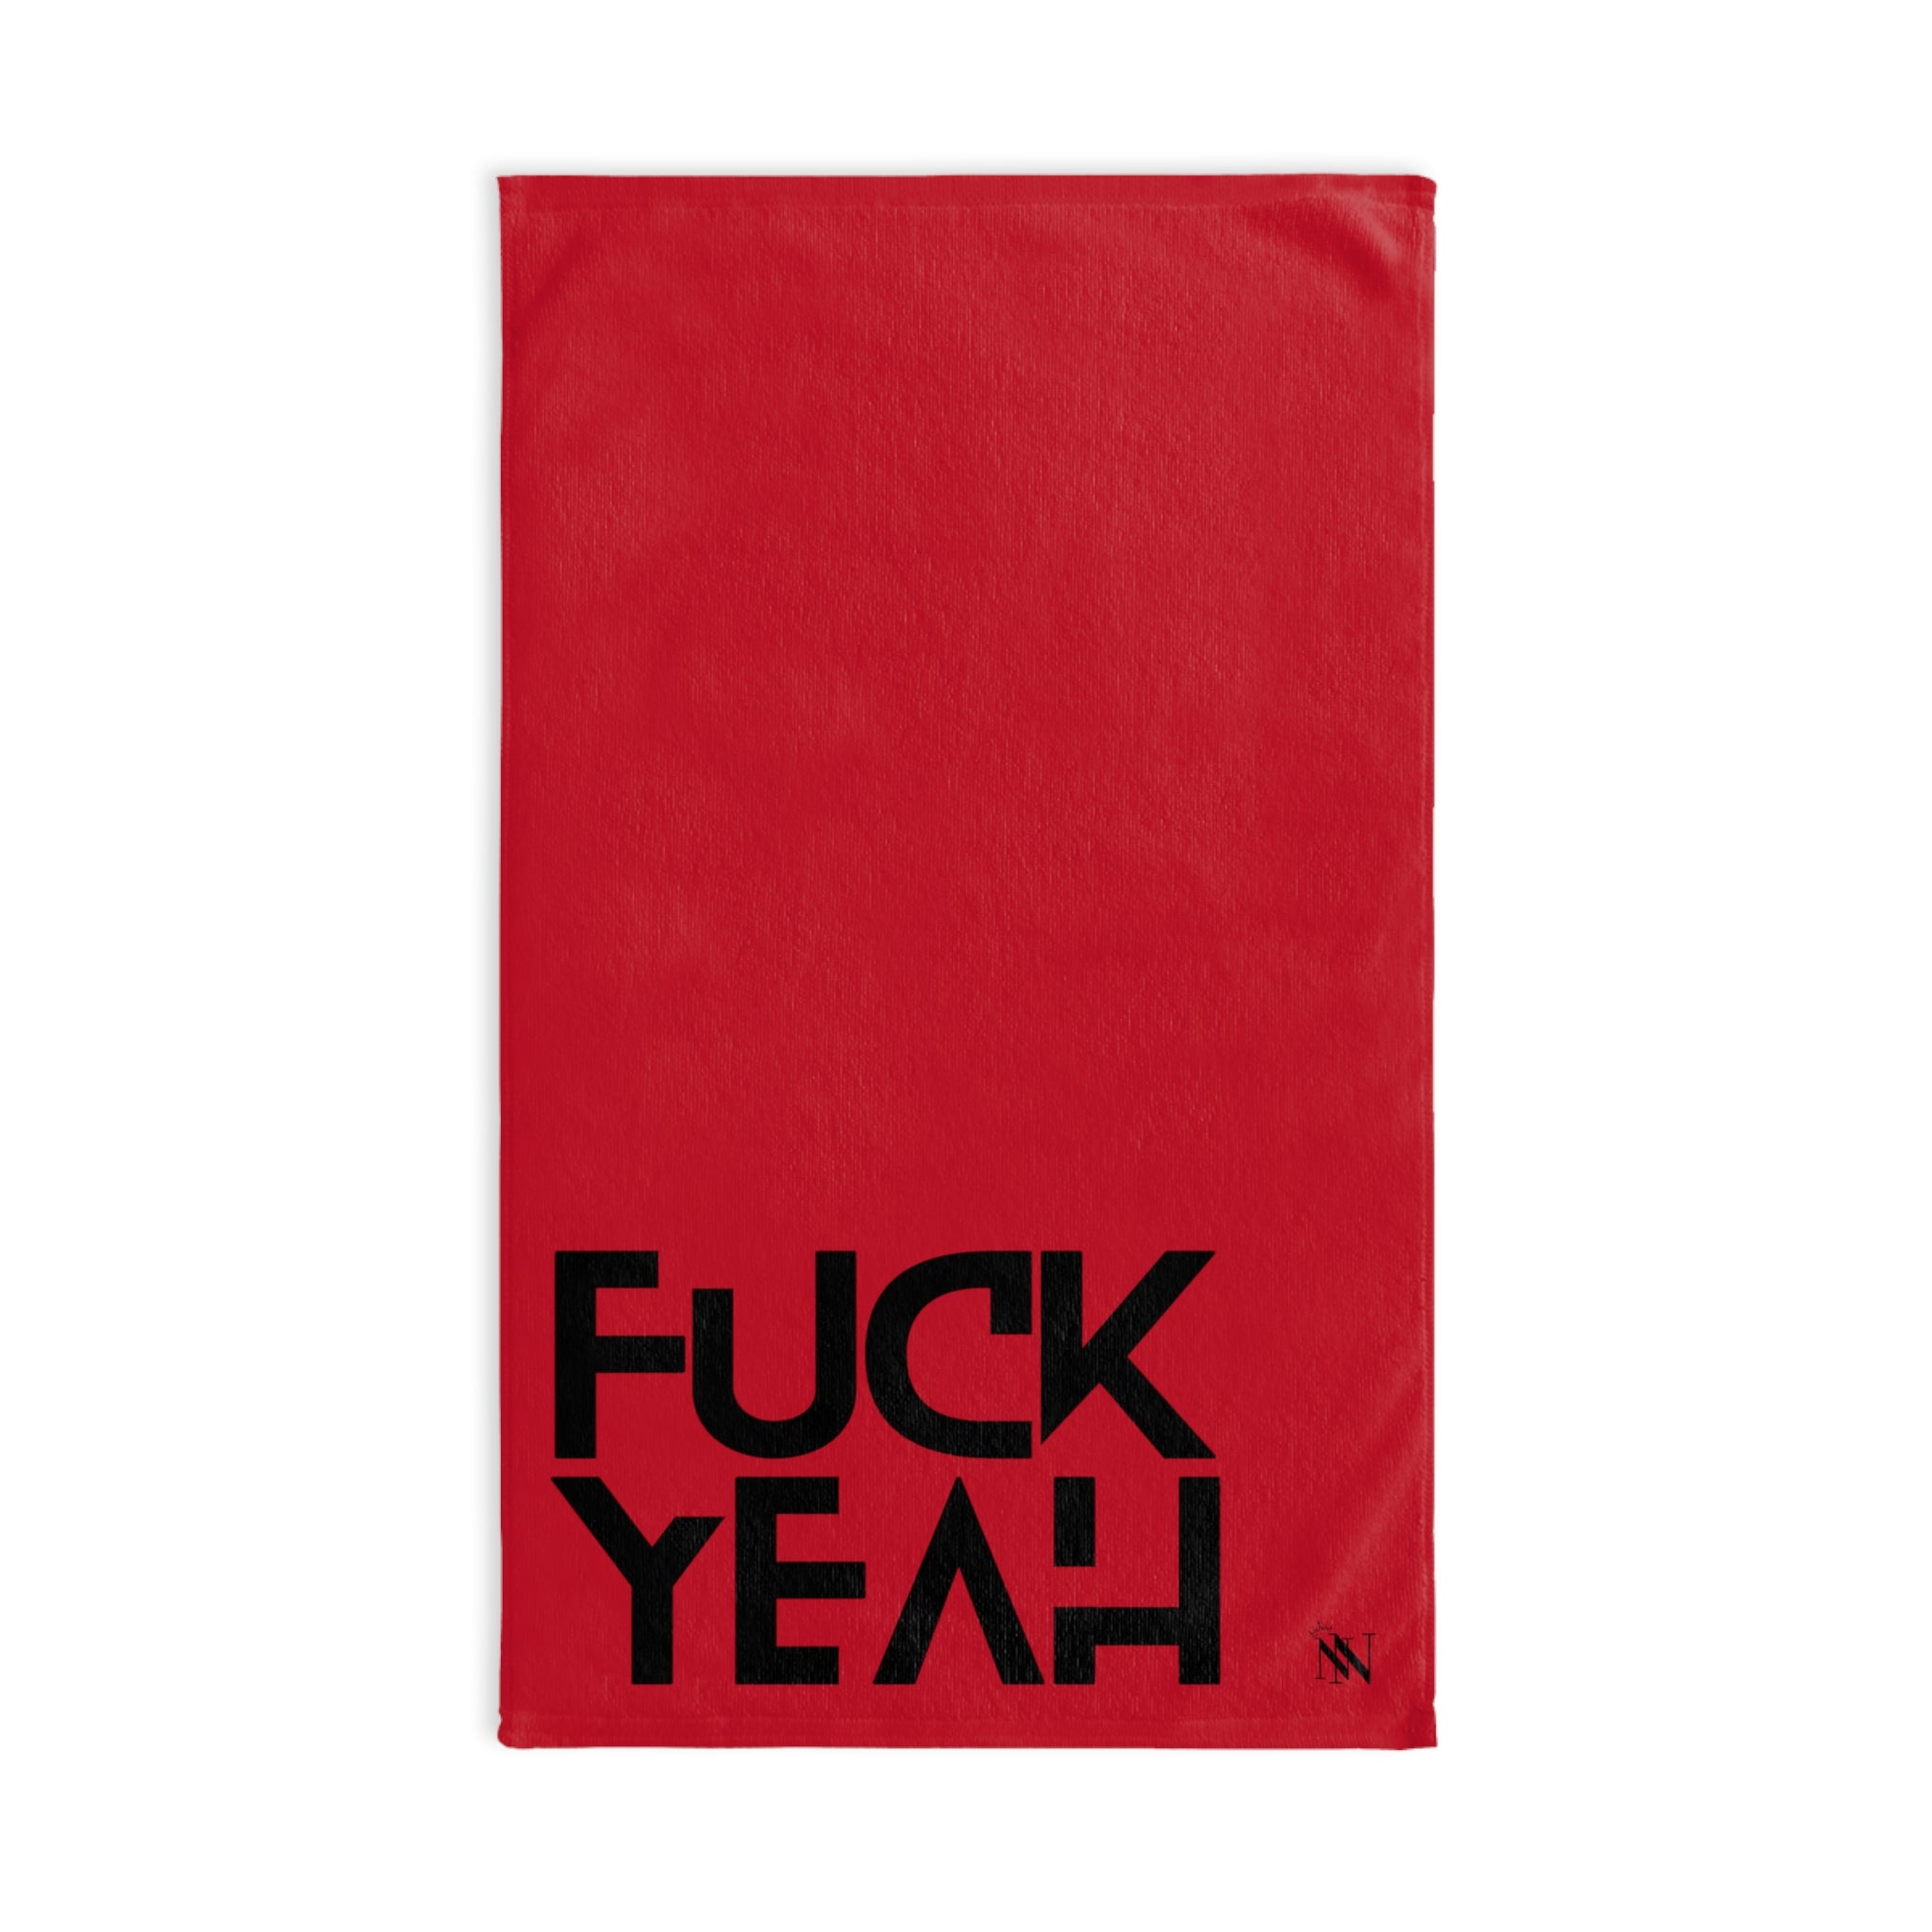 Yeah F*ck Yes Red | Sexy Gifts for Boyfriend, Funny Towel Romantic Gift for Wedding Couple Fiance First Year 2nd Anniversary Valentines, Party Gag Gifts, Joke Humor Cloth for Husband Men BF NECTAR NAPKINS